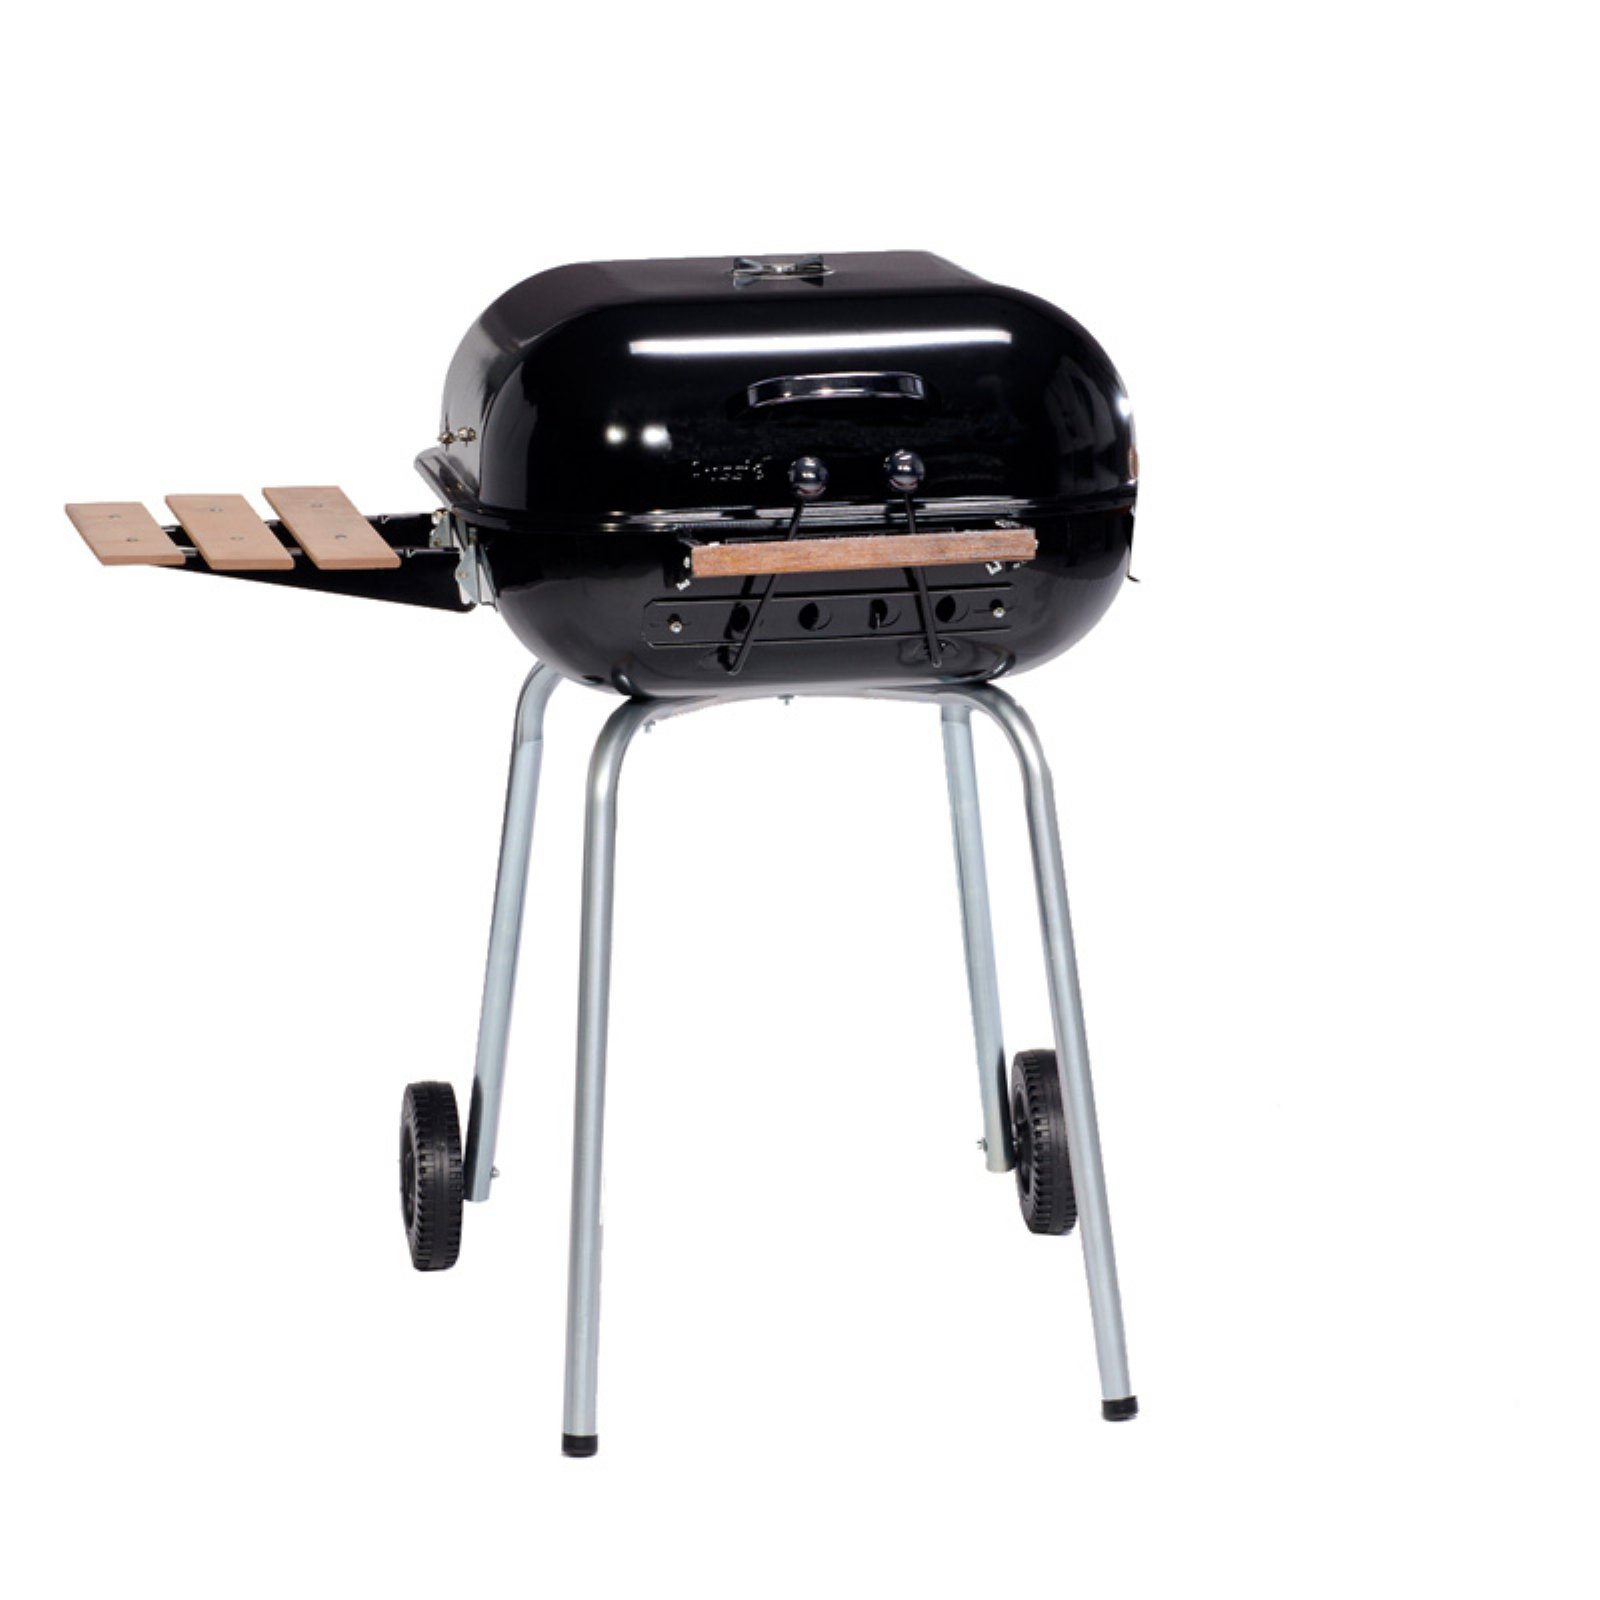 Americana Swinger 6 Position Charcoal Grill - image 2 of 8